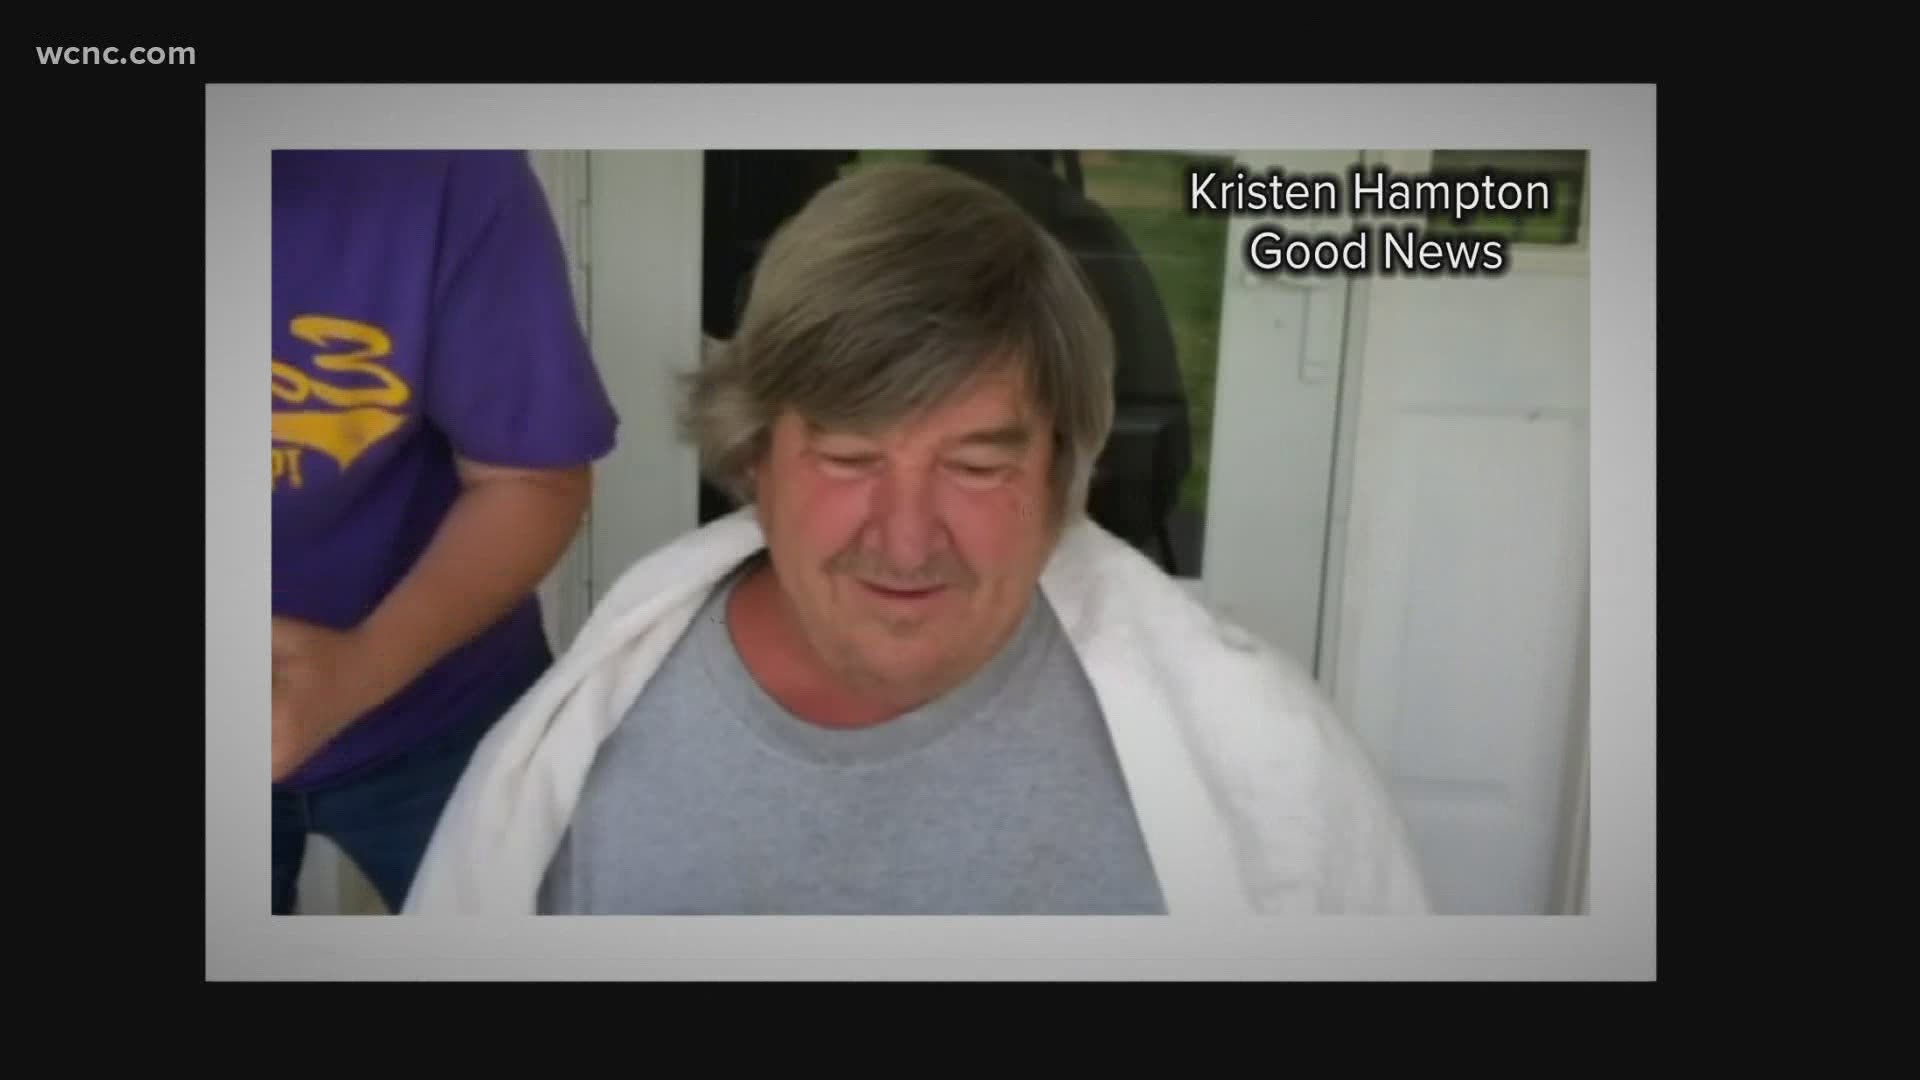 A simple front porch haircut quickly turned into much more than that when 1,600 people watching live donated more than $33,000 for charity.